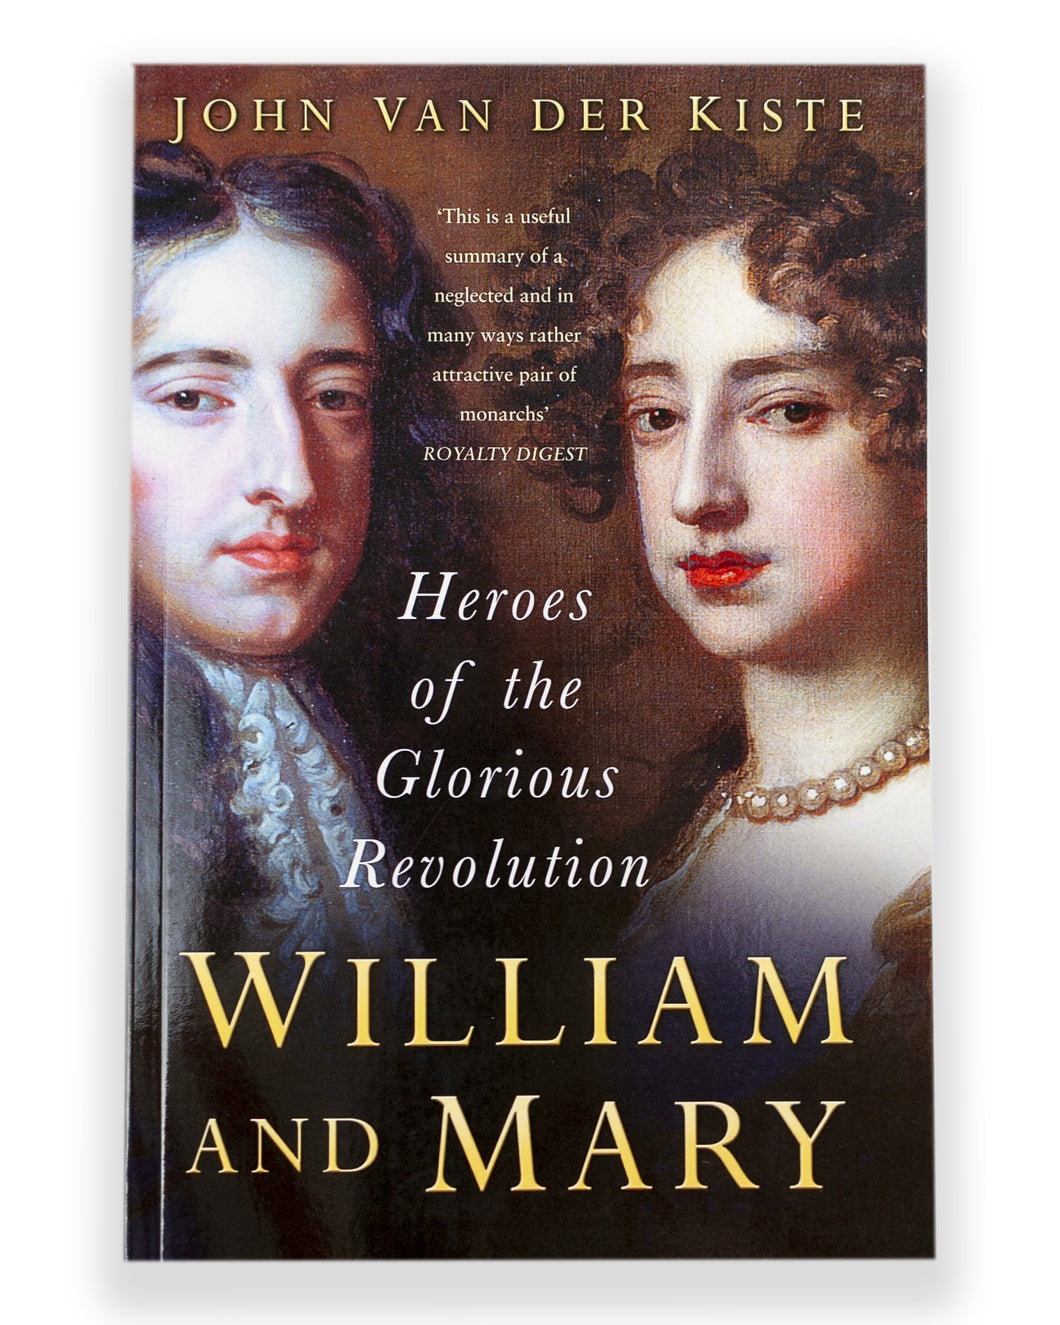 The front cover of the book William and Mary by John Van Der Kirste